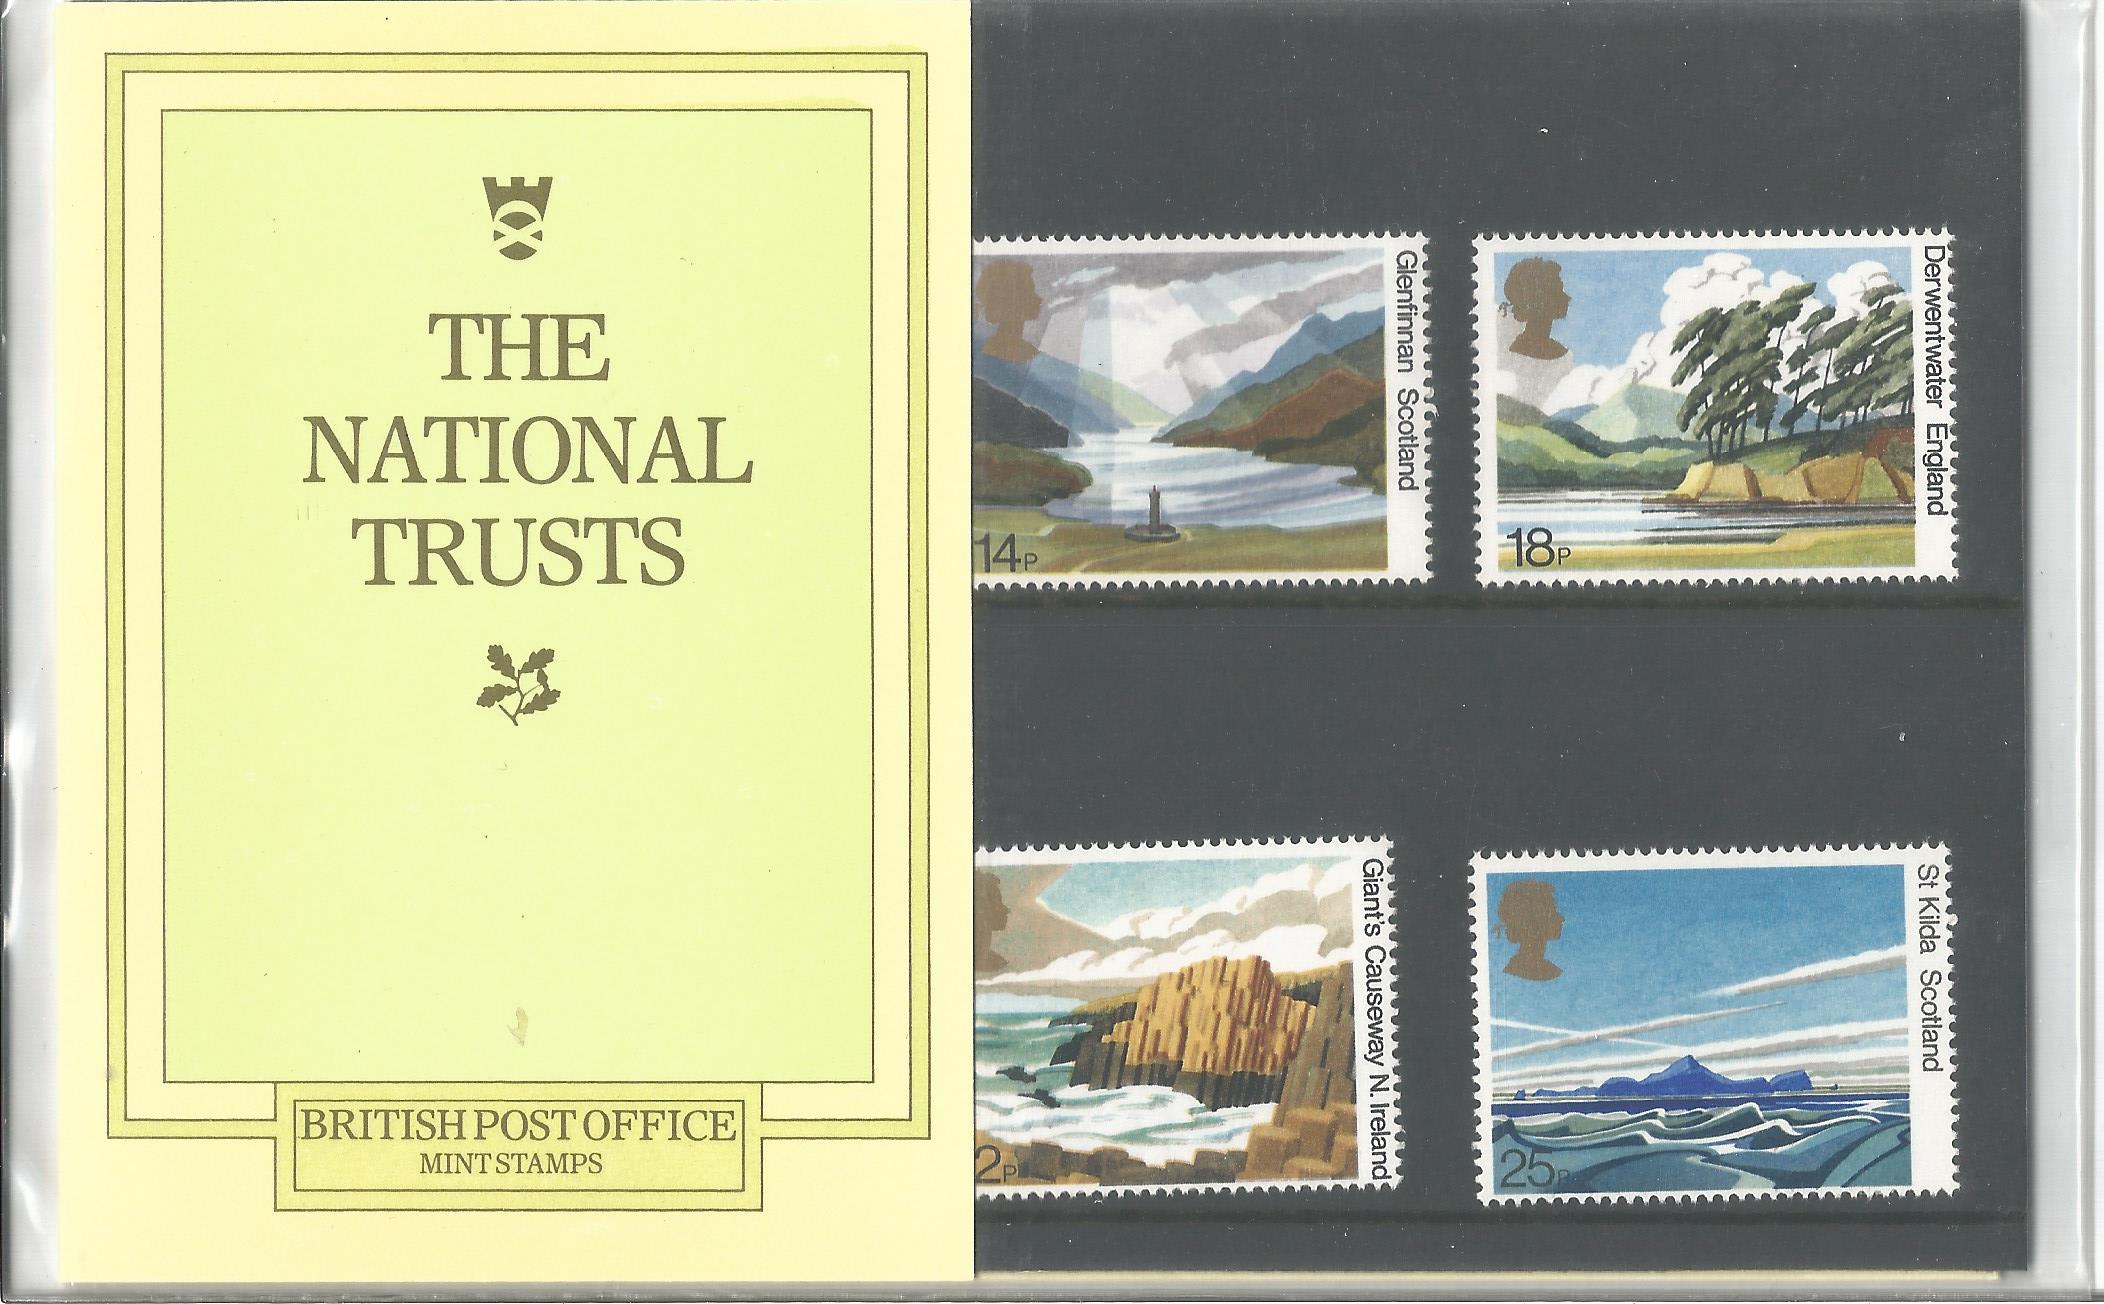 GB mint stamps Presentation Pack no 127 The National Trusts. Good condition. We combine postage on